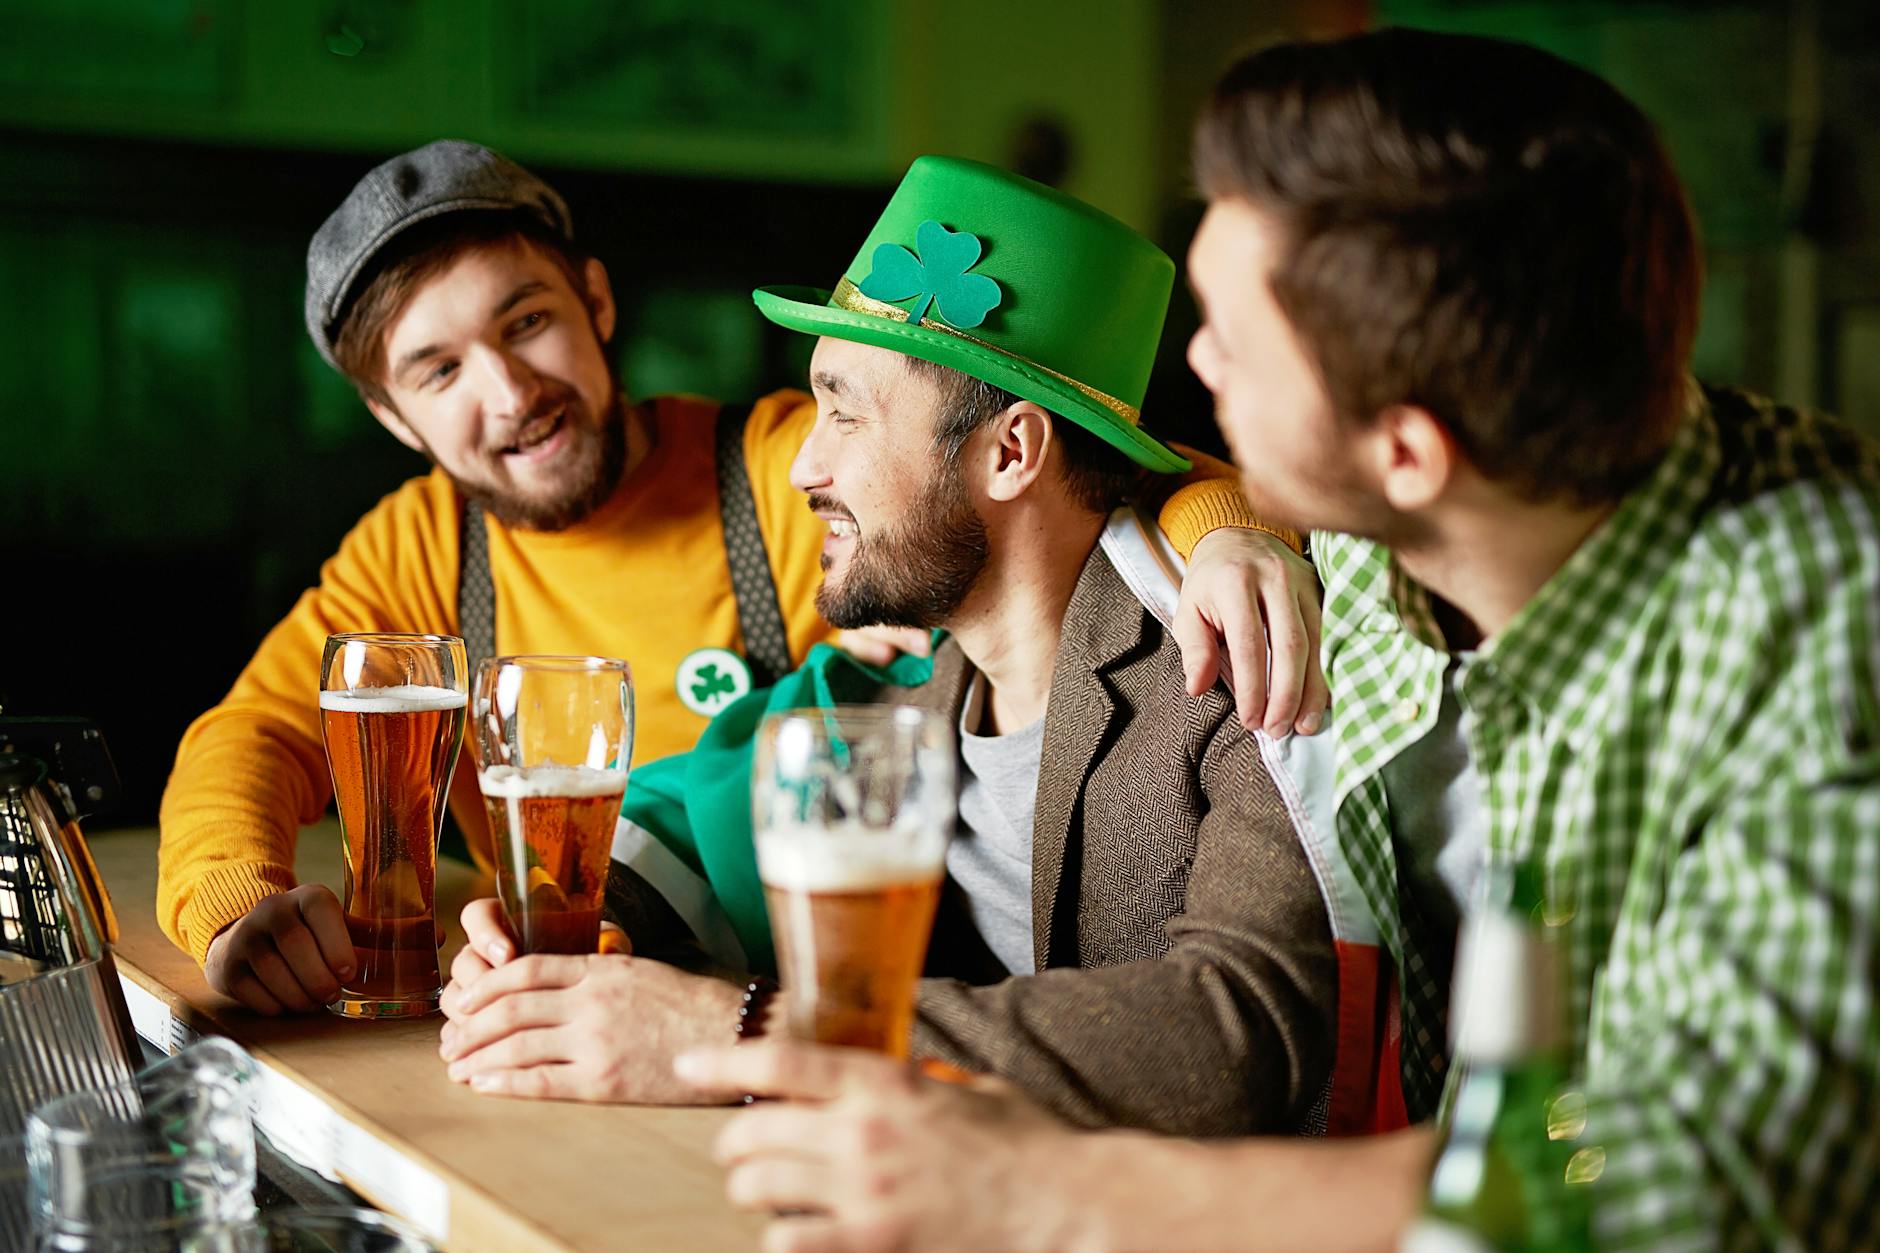 How to enjoy St. Patrick’s Day like a local in Boston